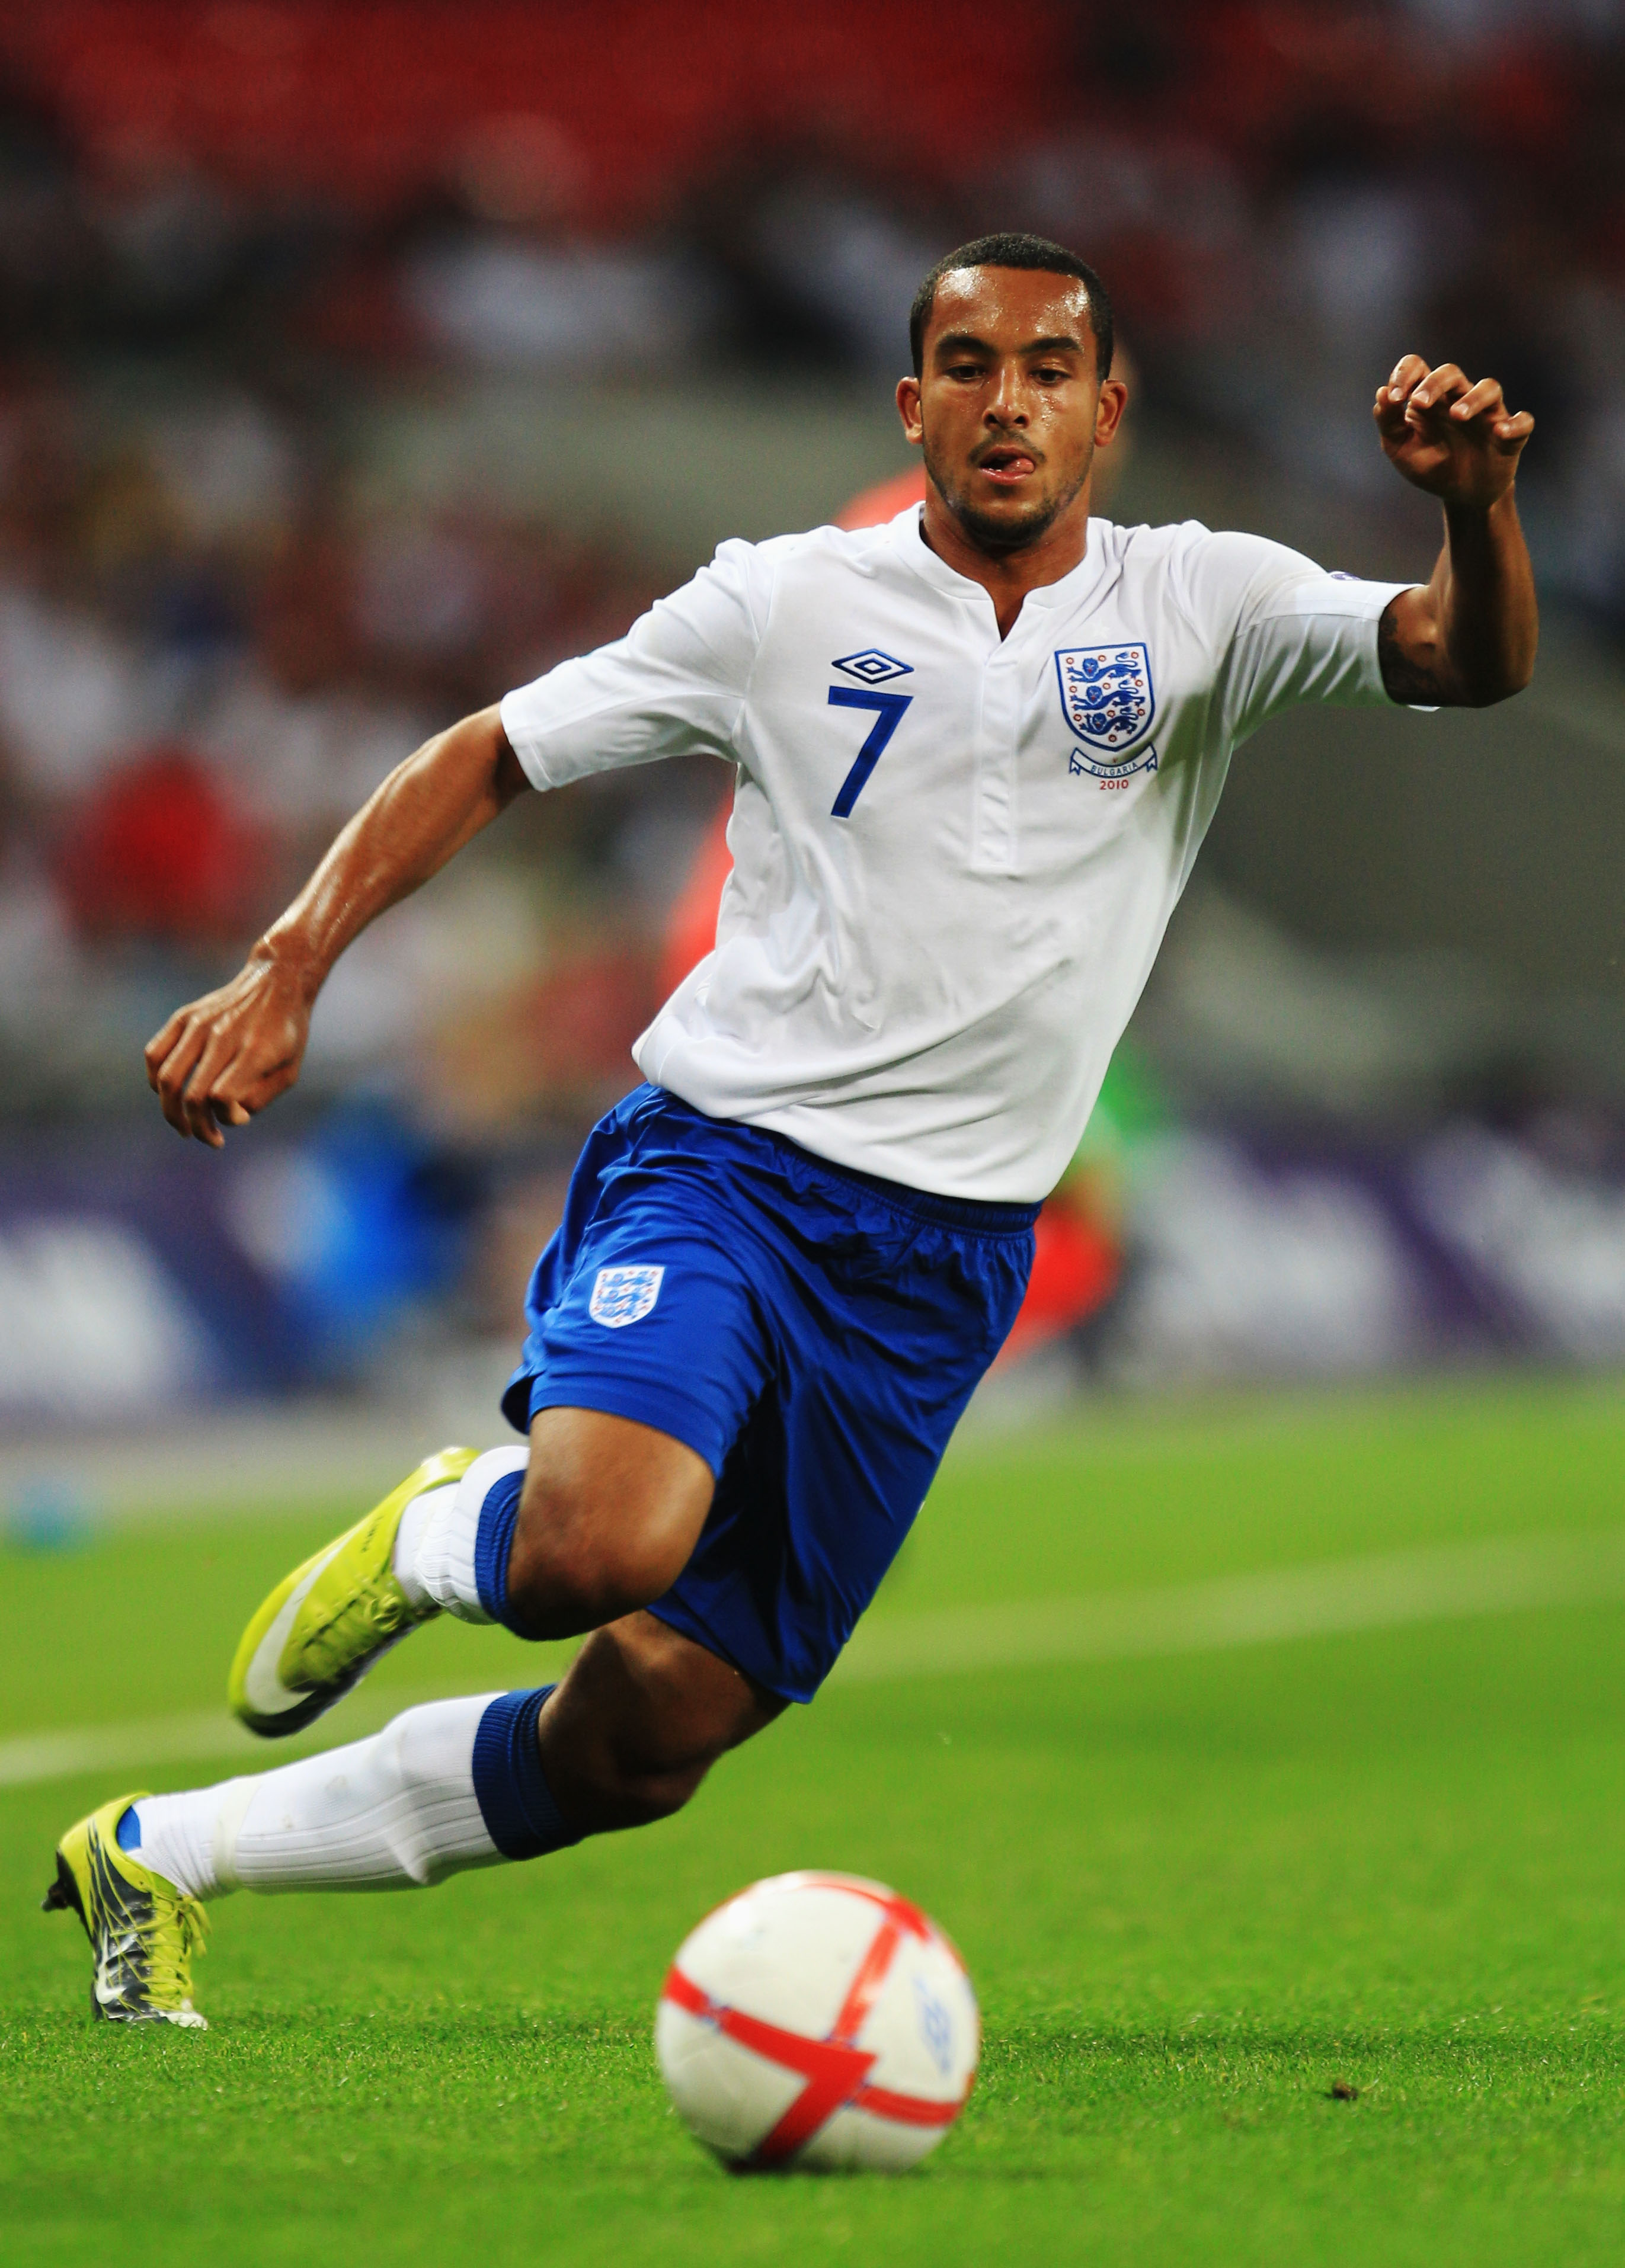 LONDON, ENGLAND - SEPTEMBER 03:  Theo Walcott of England is seen during the UEFA EURO 2012 Group G Qualifying match between England and Bulgaria at Wembley Stadium on September 3, 2010 in London, England.  (Photo by Mark Thompson/Getty Images)